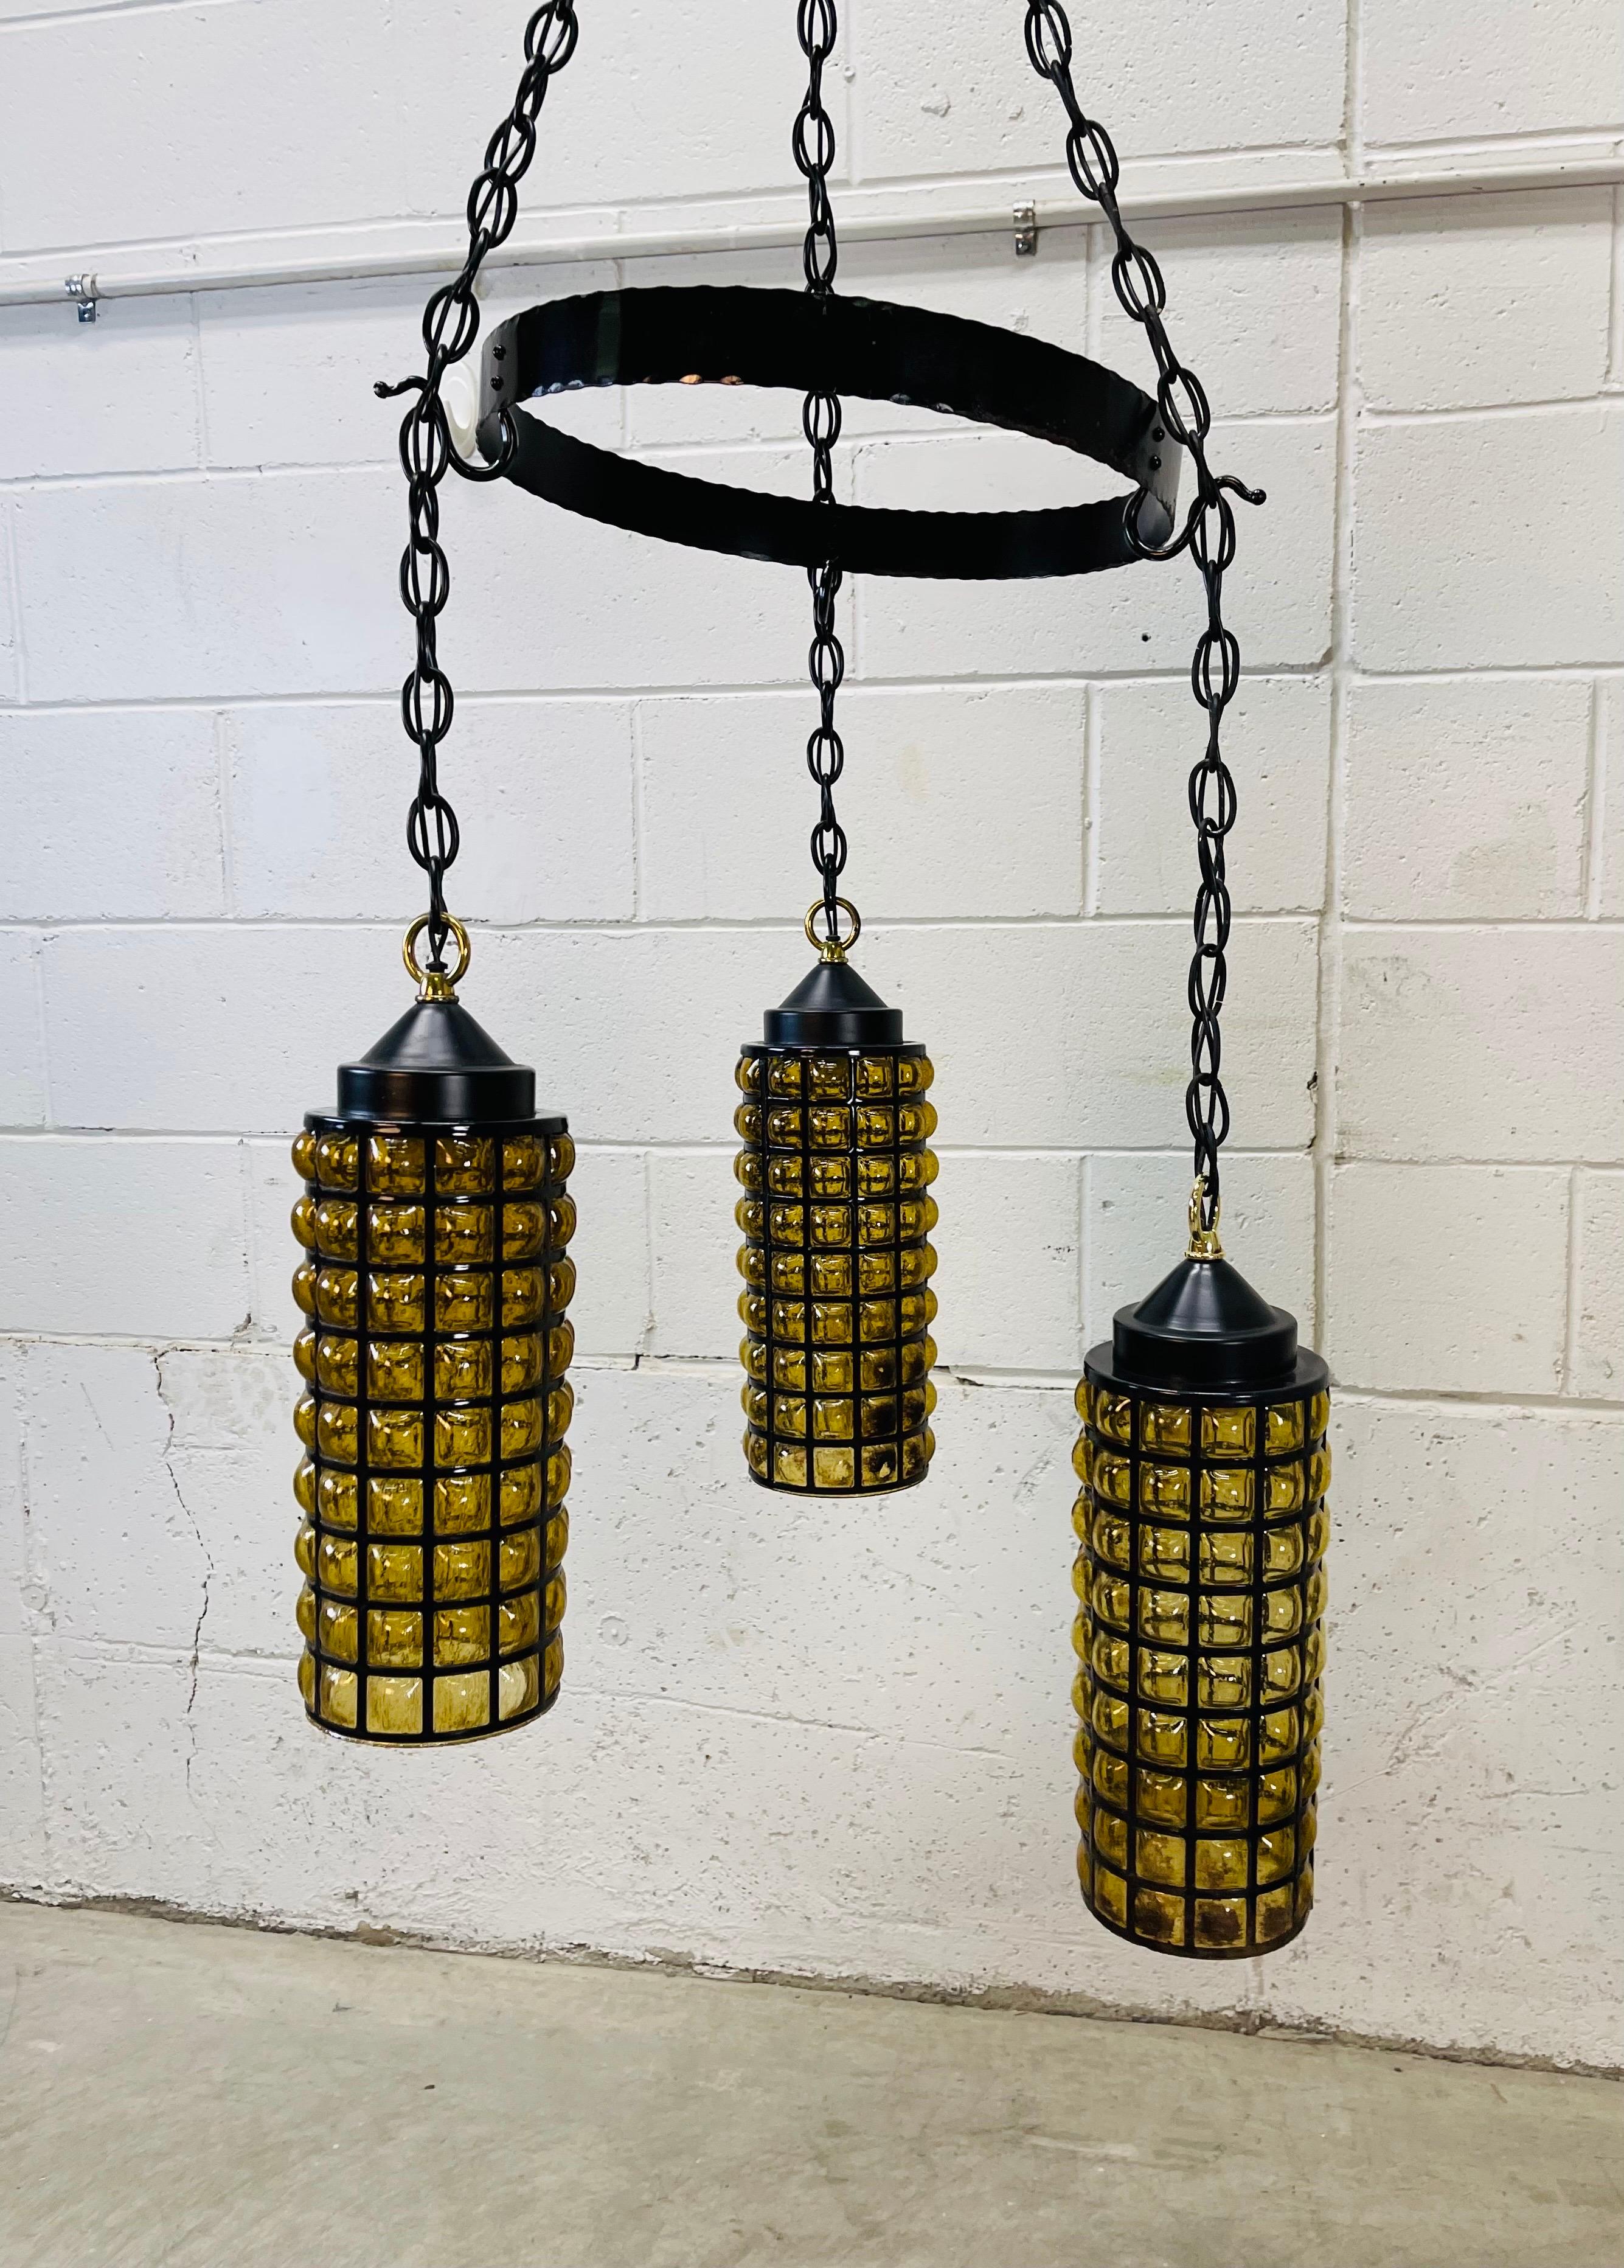 Vintage 1960s black metal and handblown amber glass pair of pendant lights (only one shown). The lights are hardwired and will need to be assembled. The three pendants hang from the round metal center. Chain drop is 22”H max and can be adjusted. The